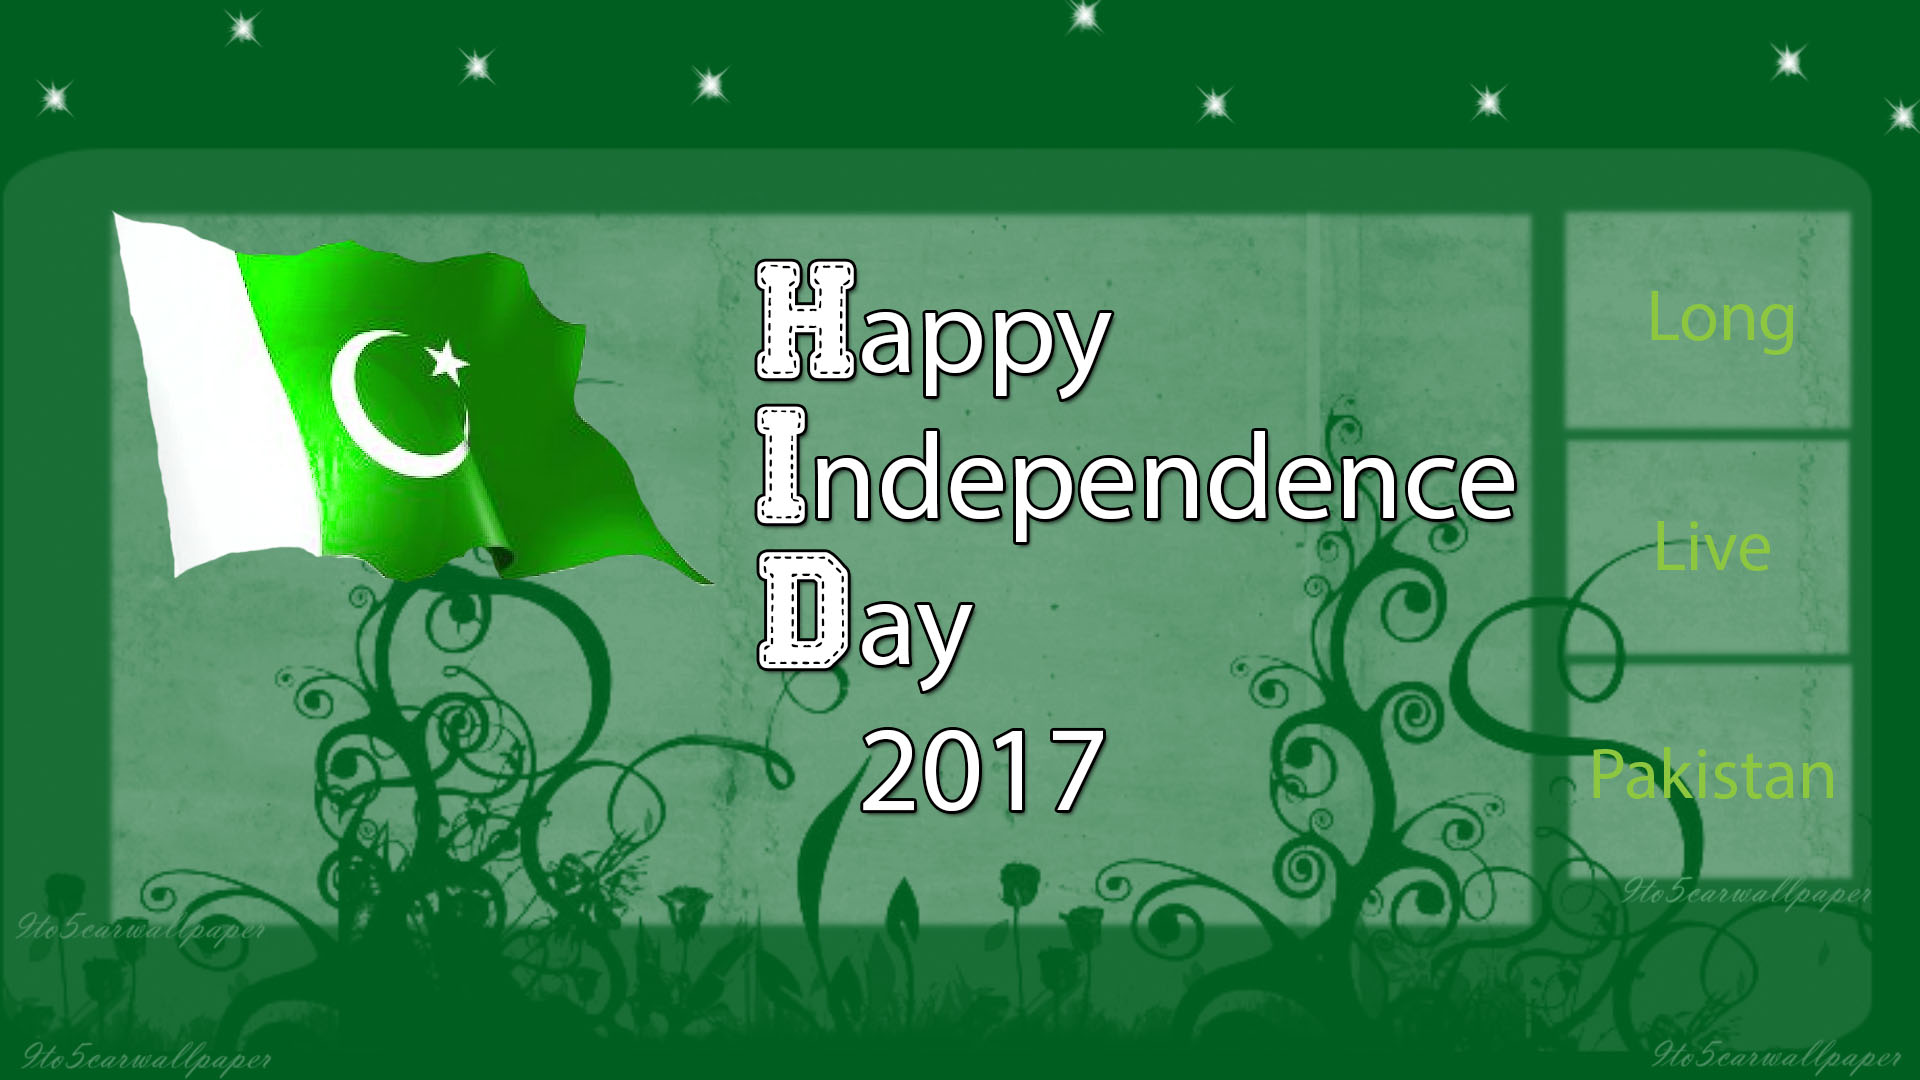 70 Independence Day Pakistan - HD Wallpaper 